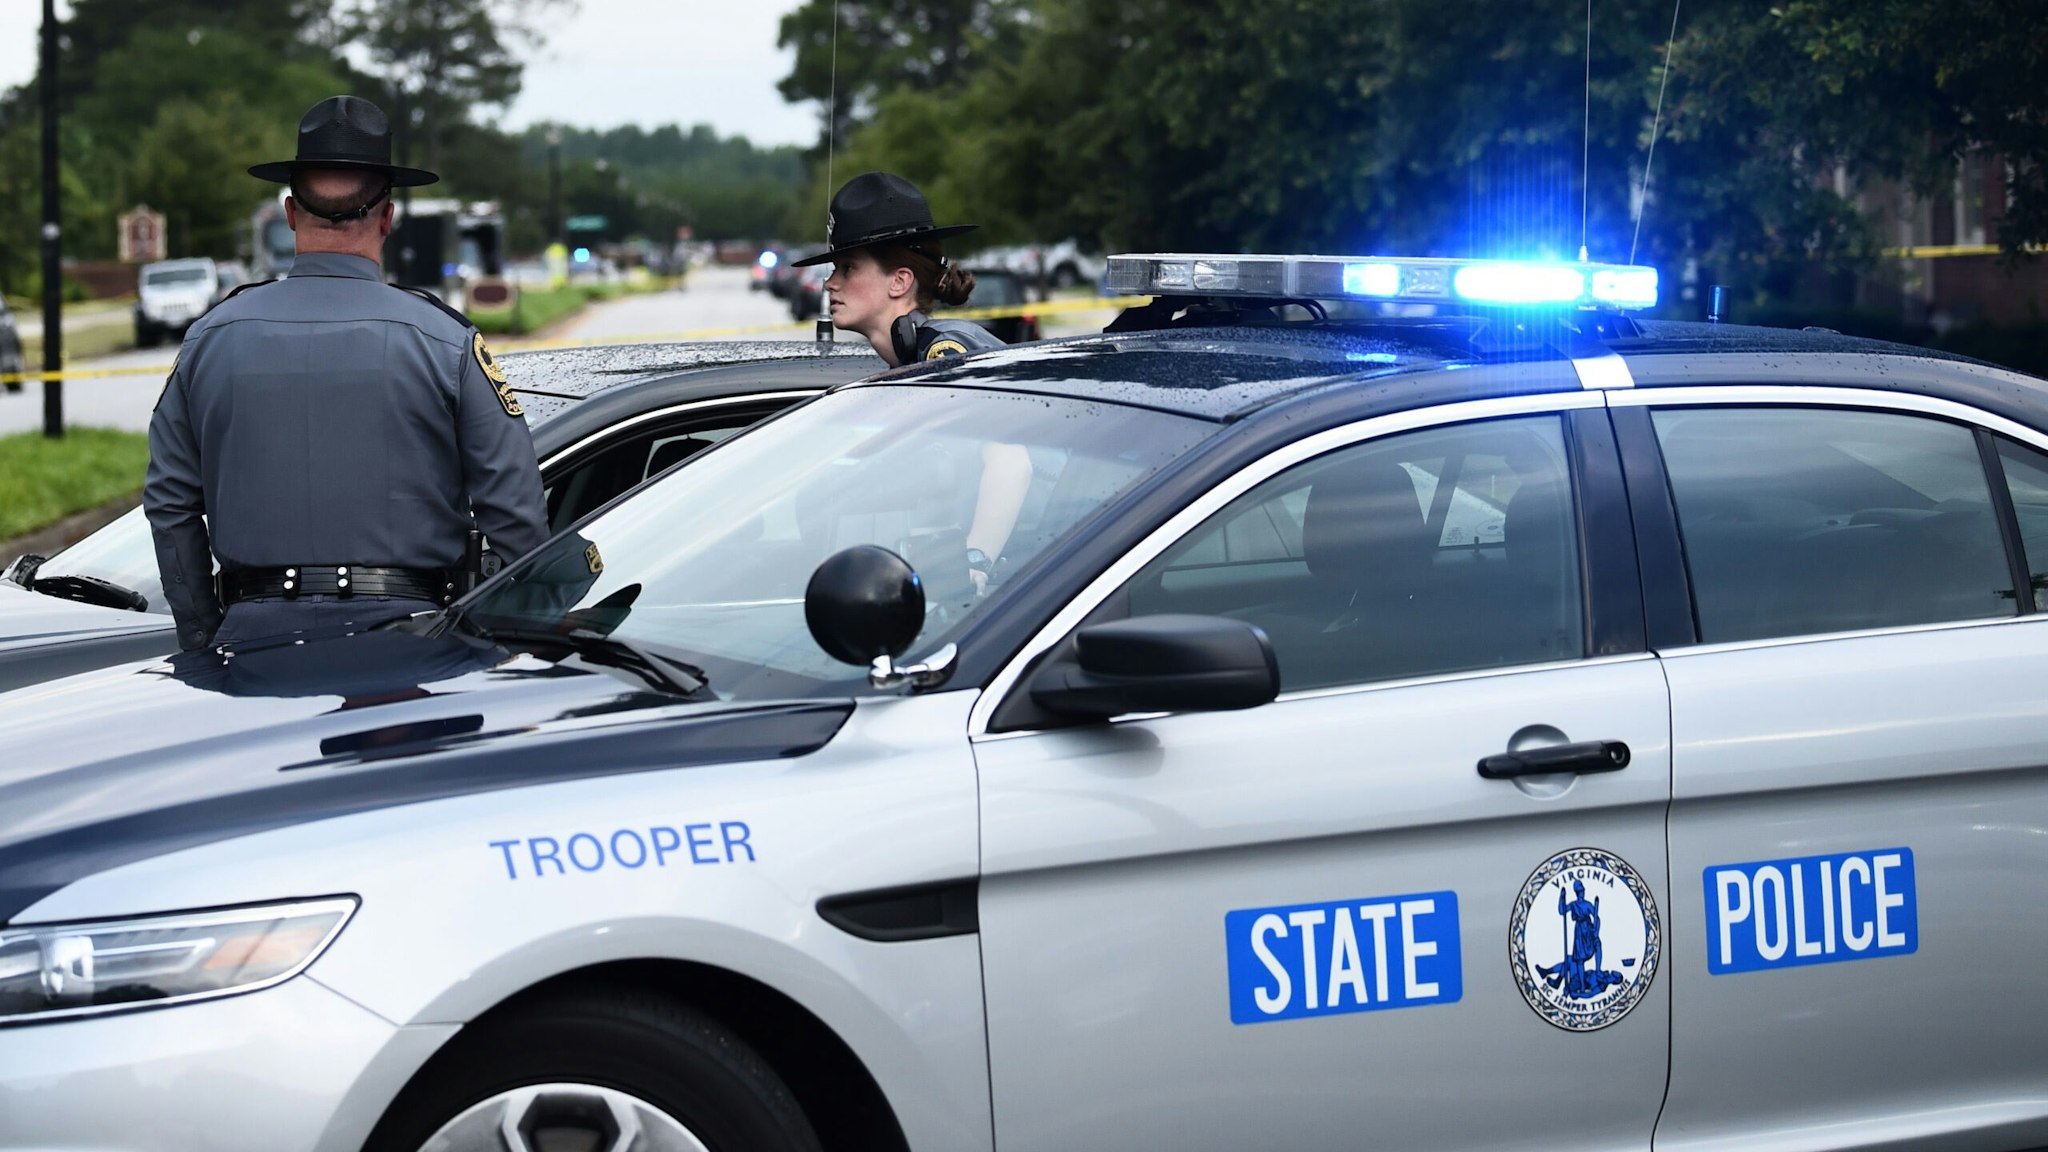 Virginia State Troopers guards a roadblock on June 1, 2019, at the scene of the mass shooting in the Virginia Beach Municipal center in Virginia, Beach, Virginia. - A municipal employee sprayed gunfire "indiscriminately" in the government building complex on May 31, 2019, police said, killing 12 people and wounding four in the latest mass shooting to rock the US.